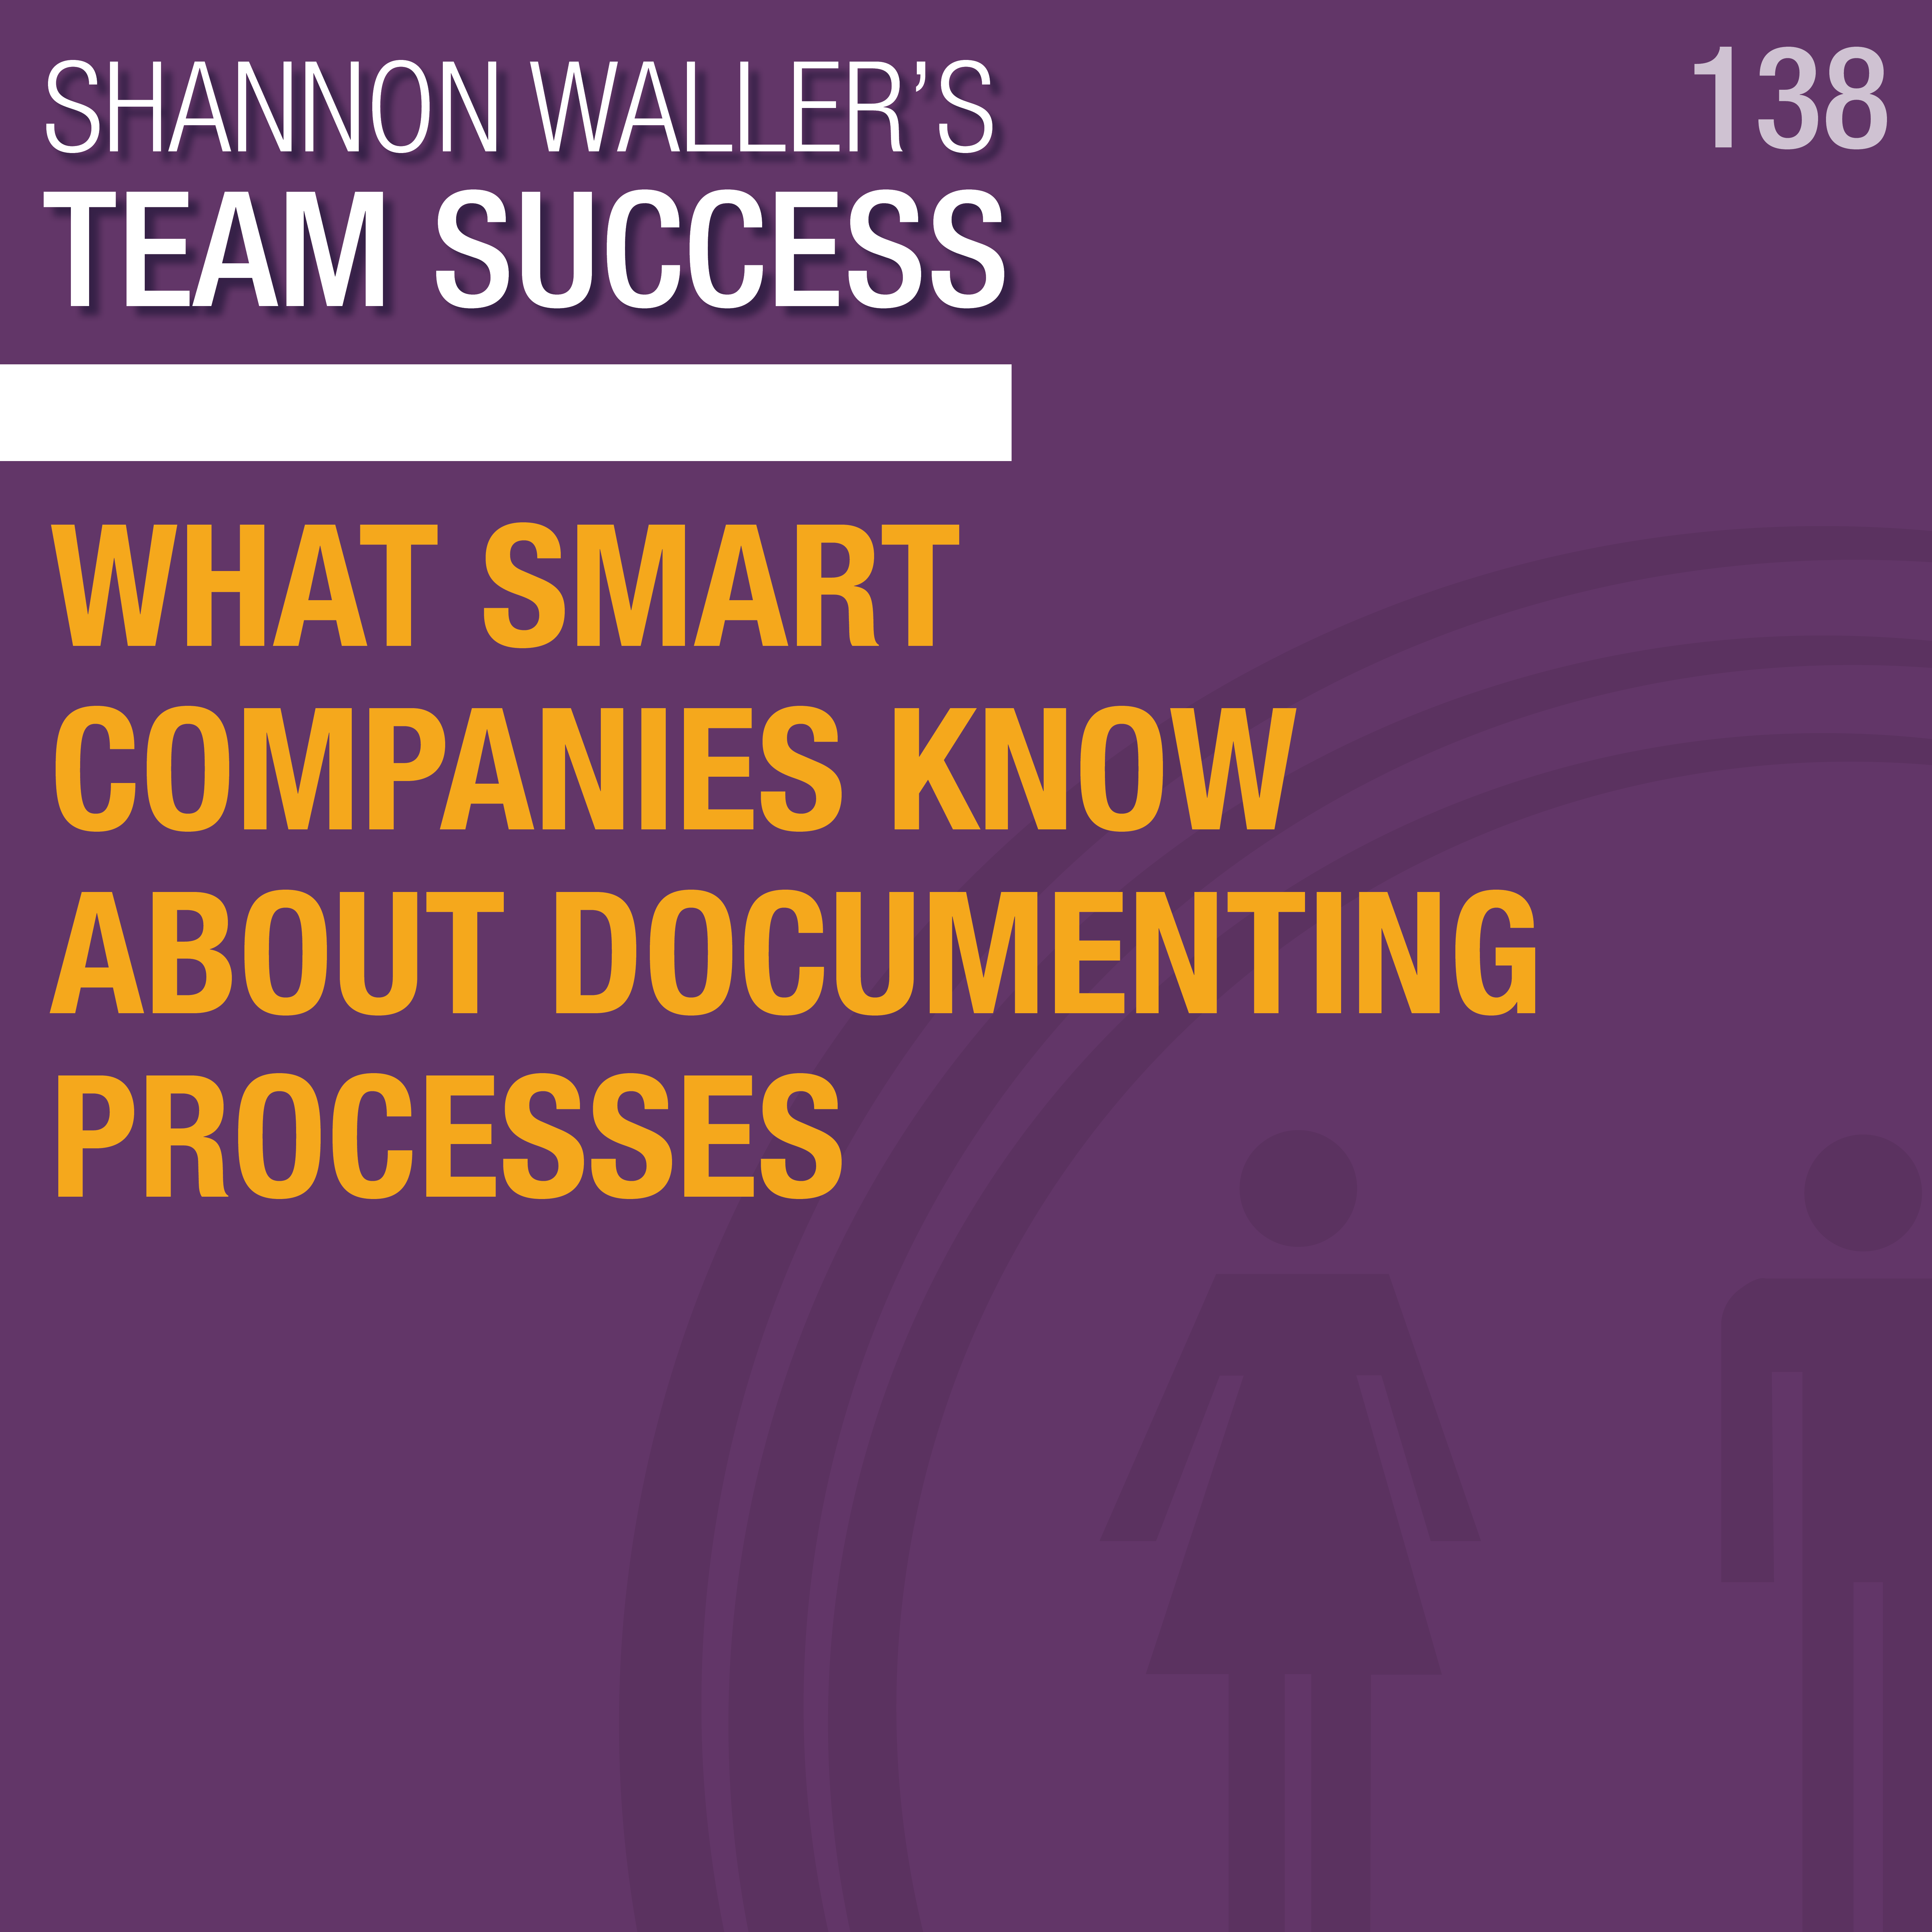 What Smart Companies Know About Documenting Processes